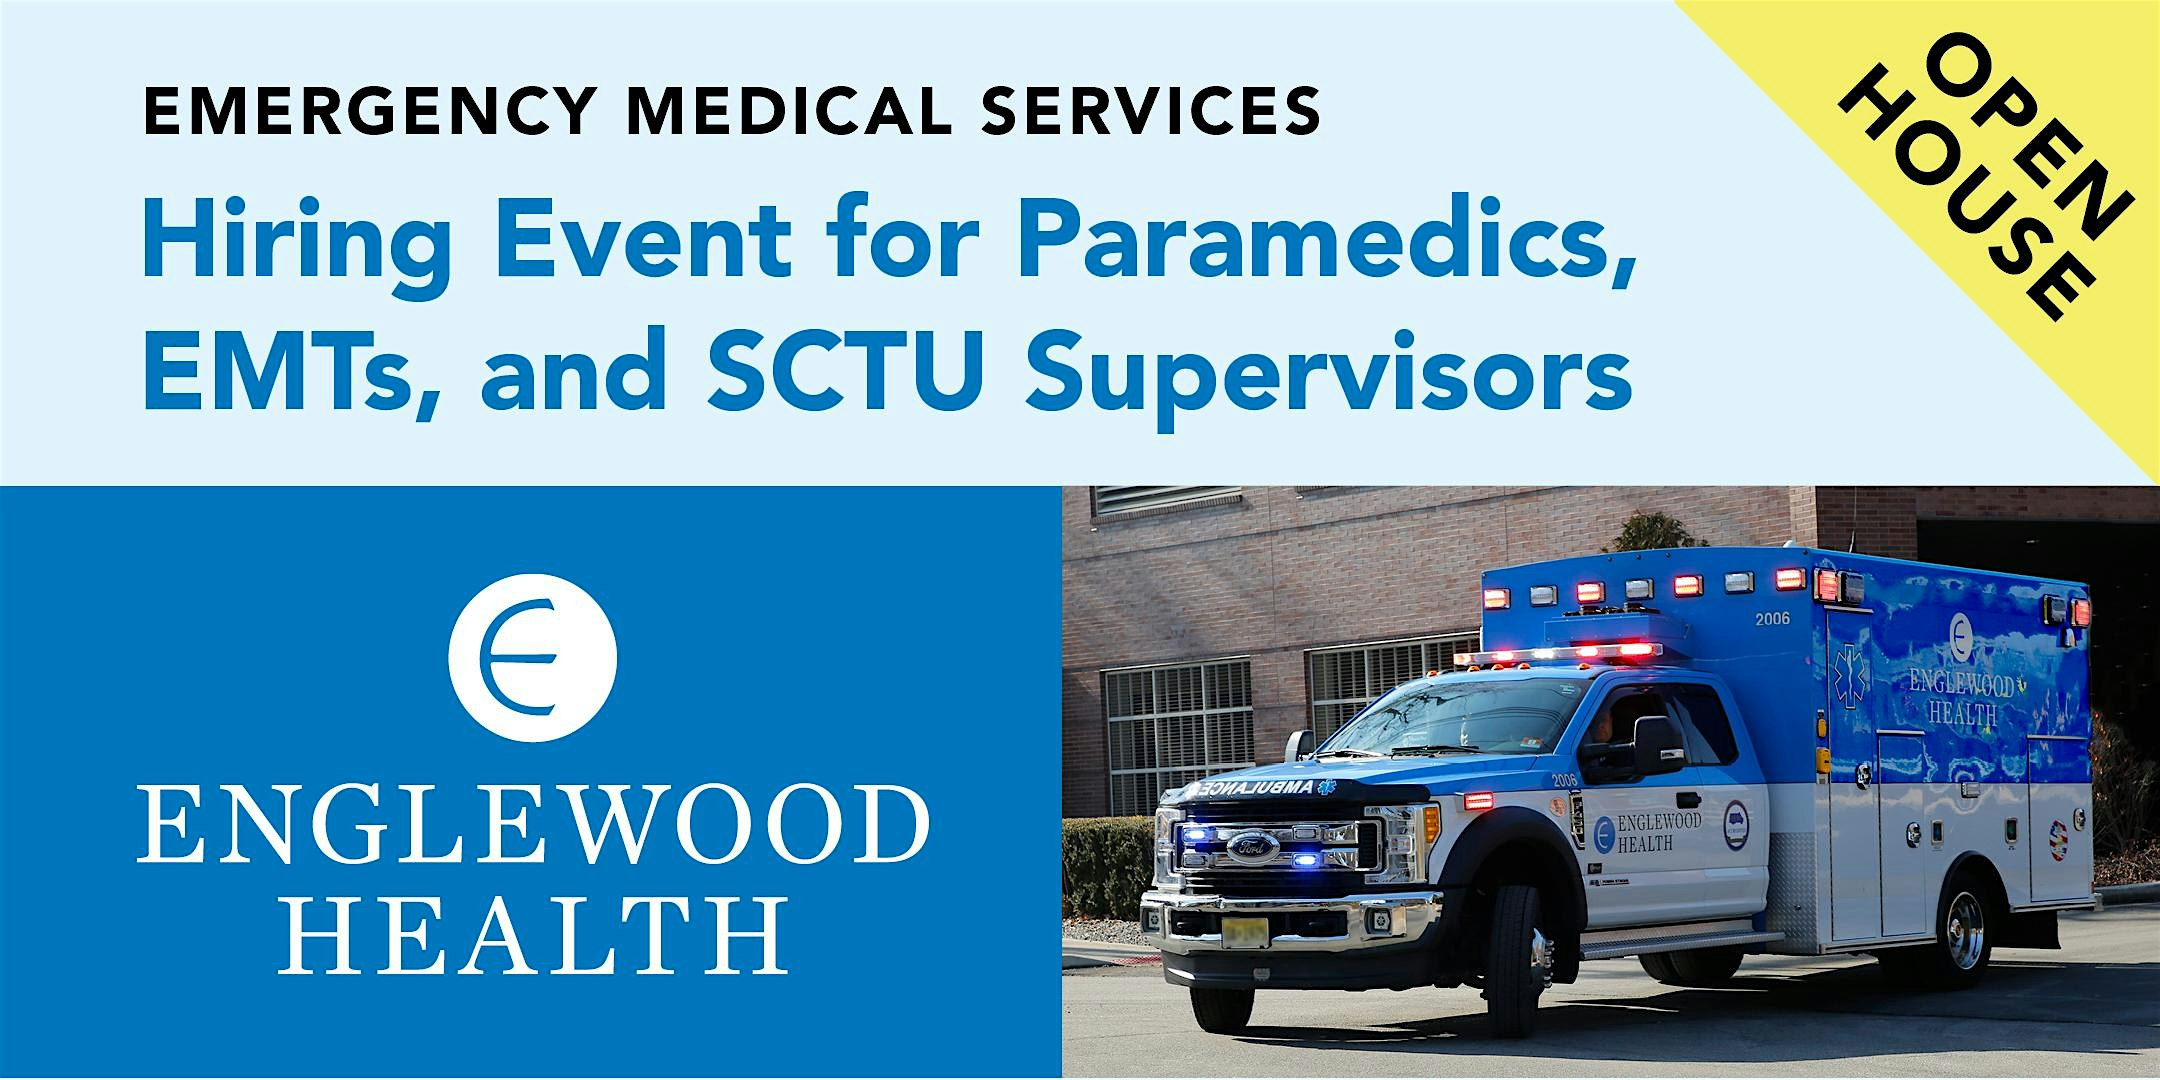 Englewood Health EMS Open House Hiring Event